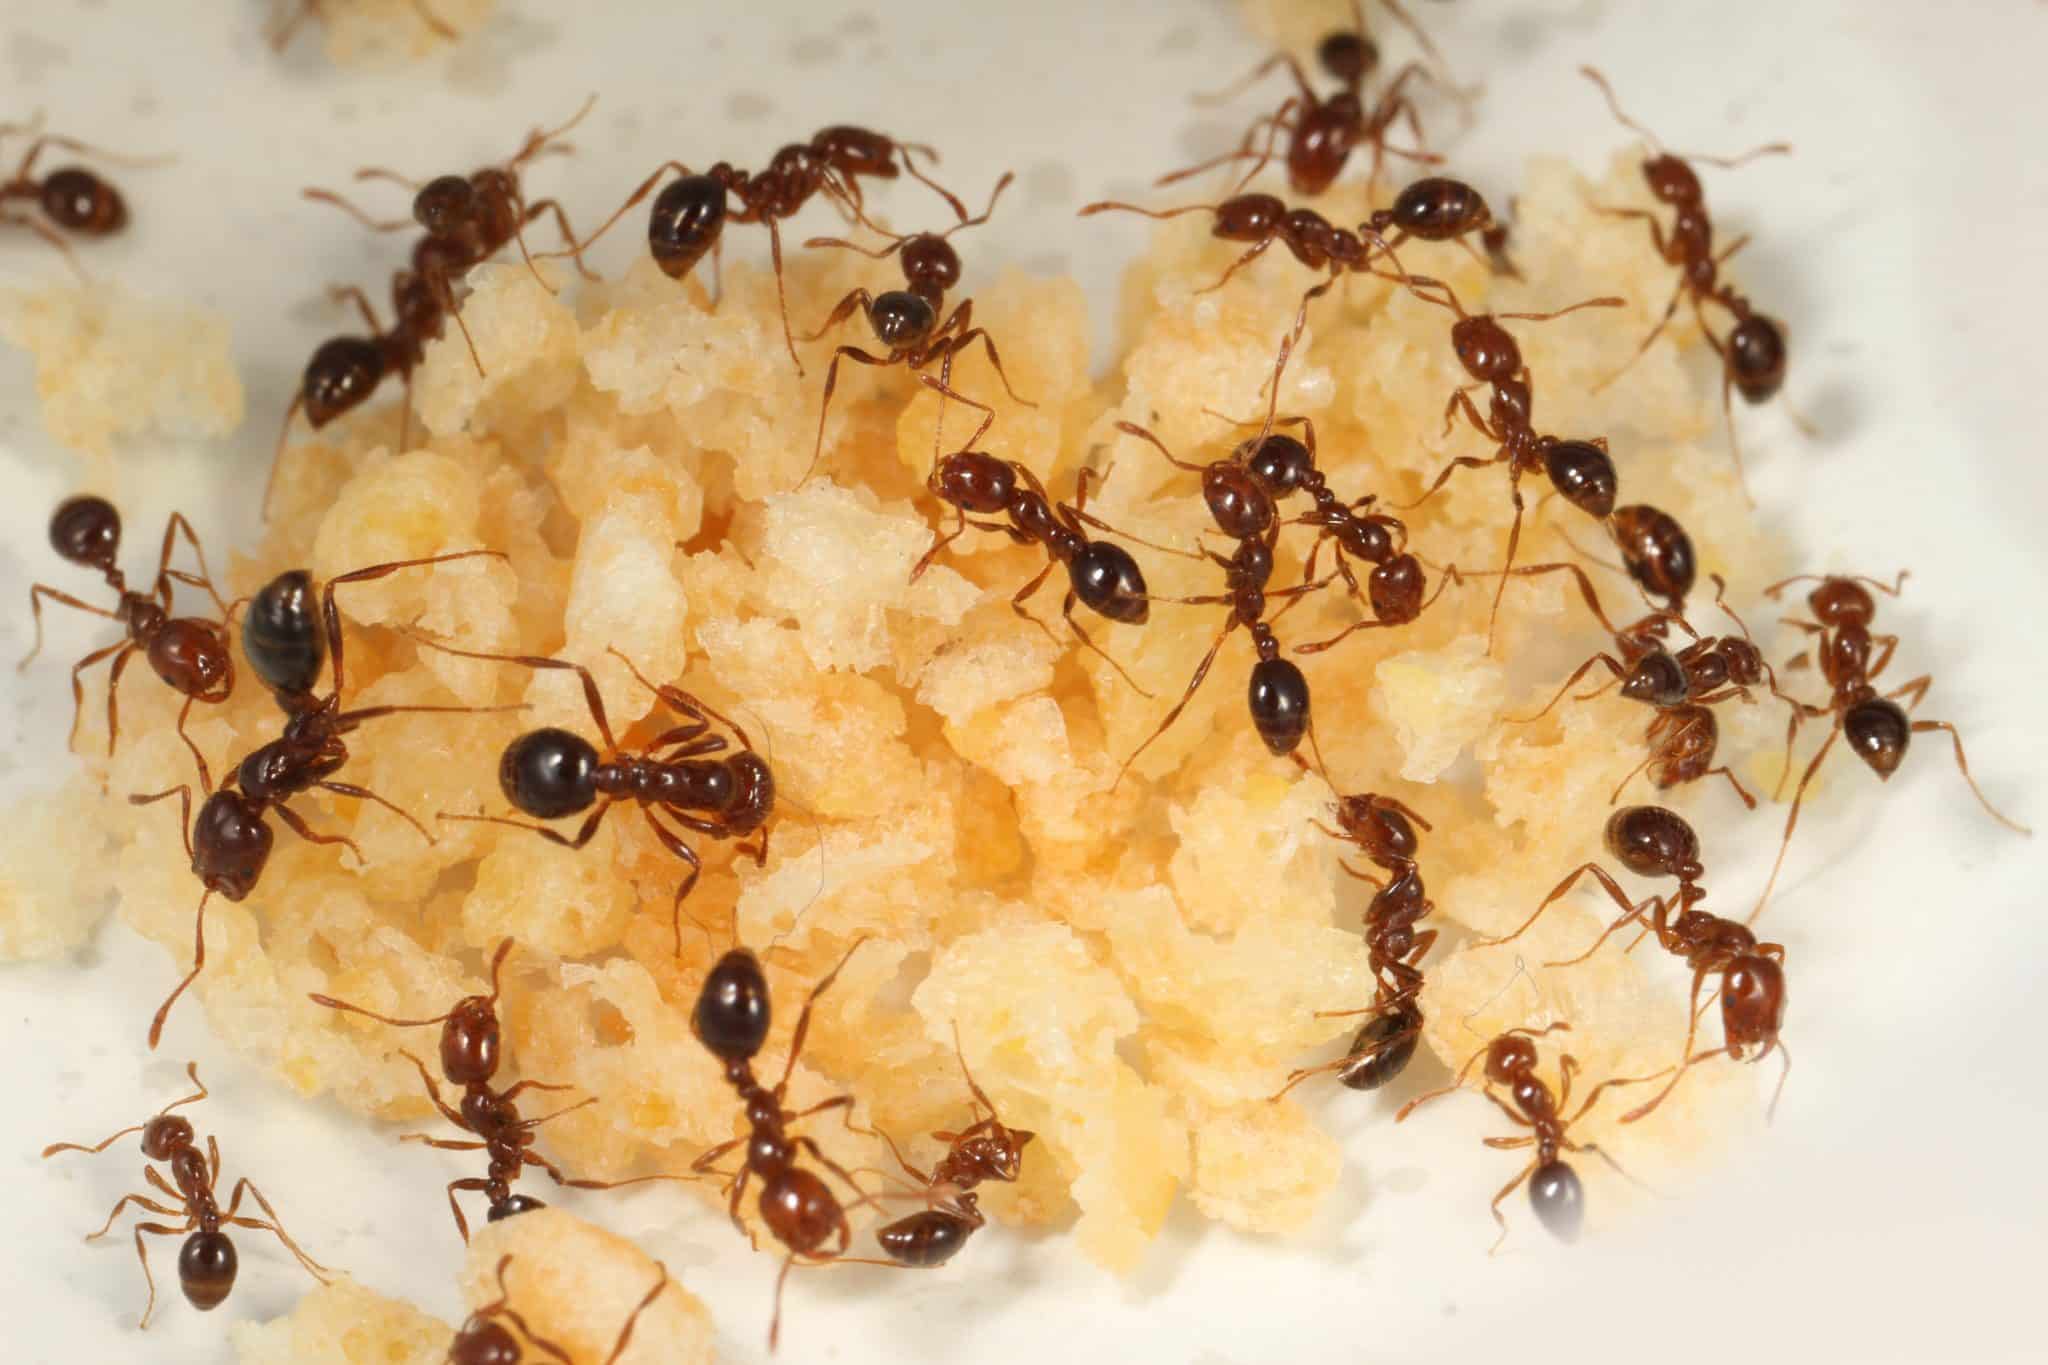 Ant Control Kits - Best Complete Ant Killer - The Pest Advice